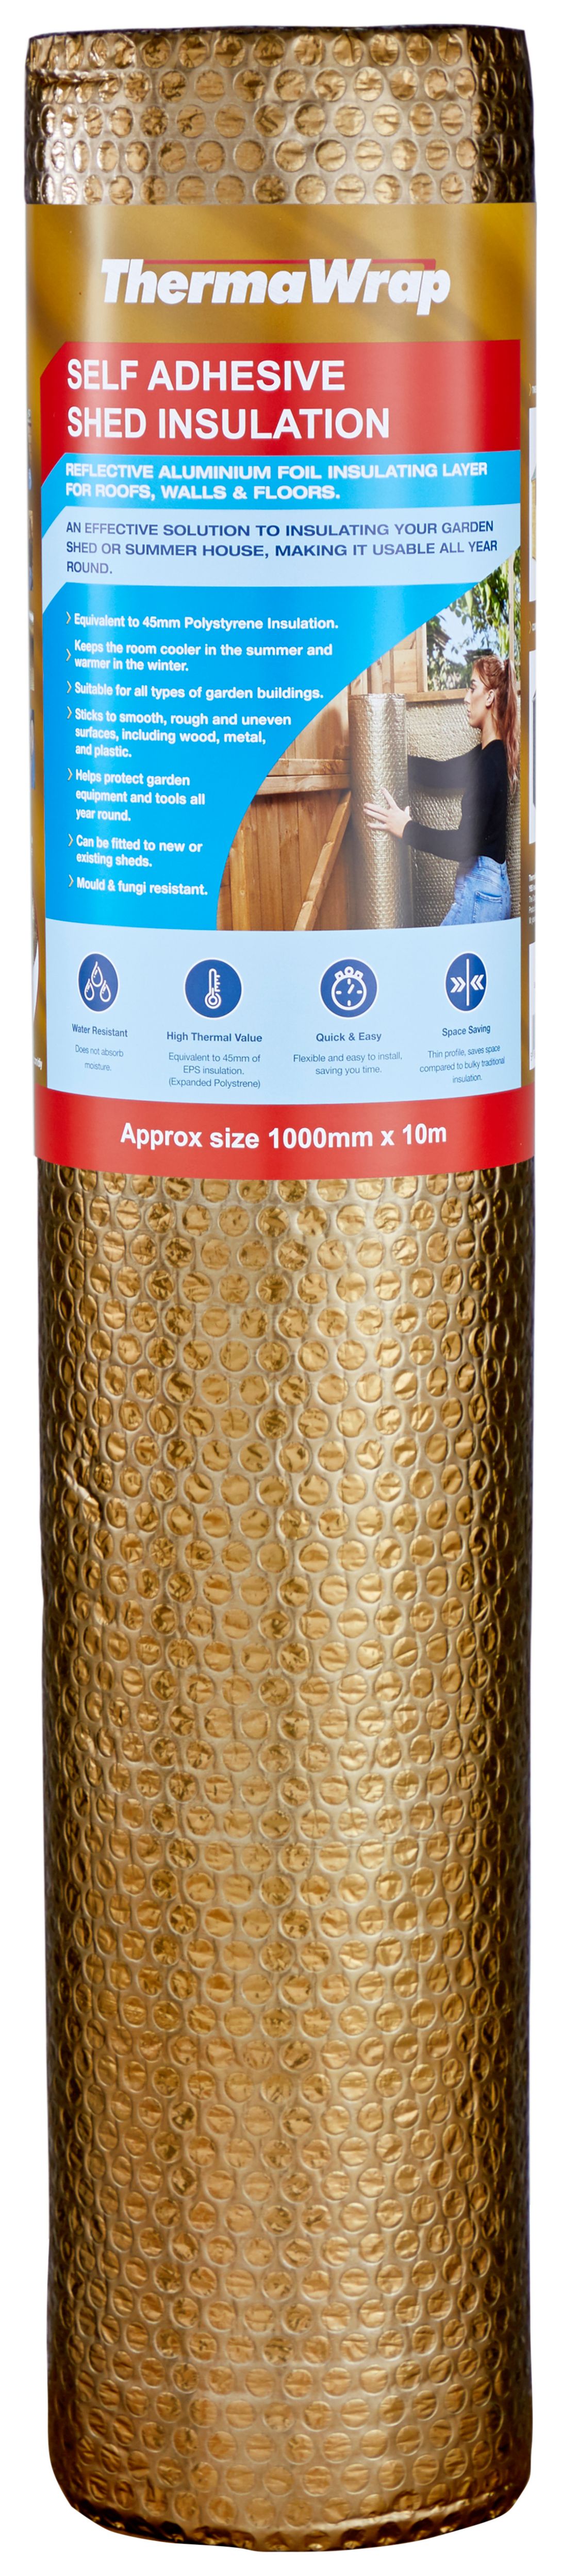 ThermaWrap Self-Adhesive Shed Insulation Roll - 1000mm x 10m